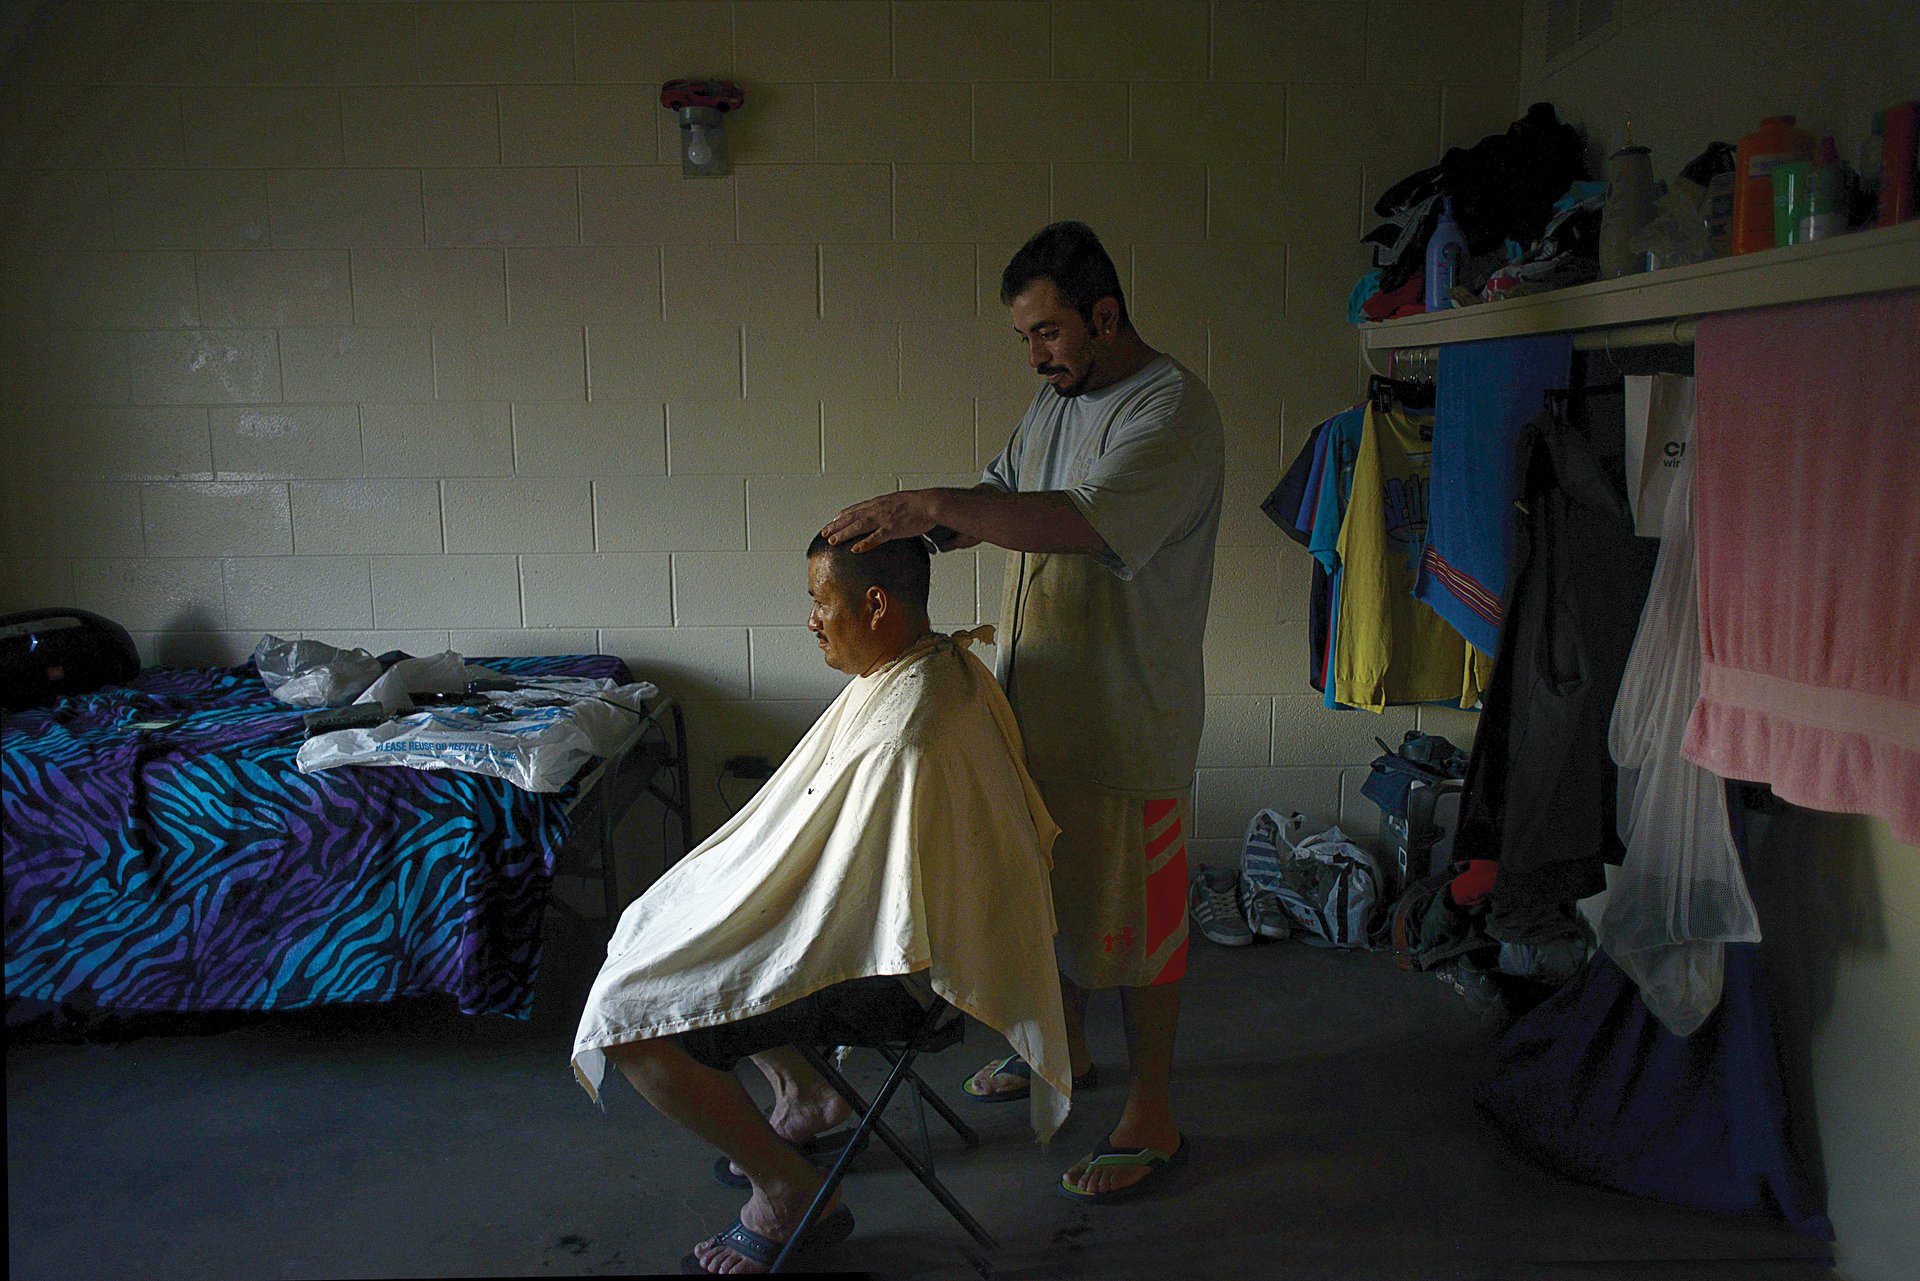 After a long day in the fields, Juan gives his colleague a haircut in the dwindling daylight. "My wife does this [hairdressing] in Mexico, and I'm actually pretty good," he says. With no cars or connection to the local community, and most of their earnings sent home, the men depend on each other for support.